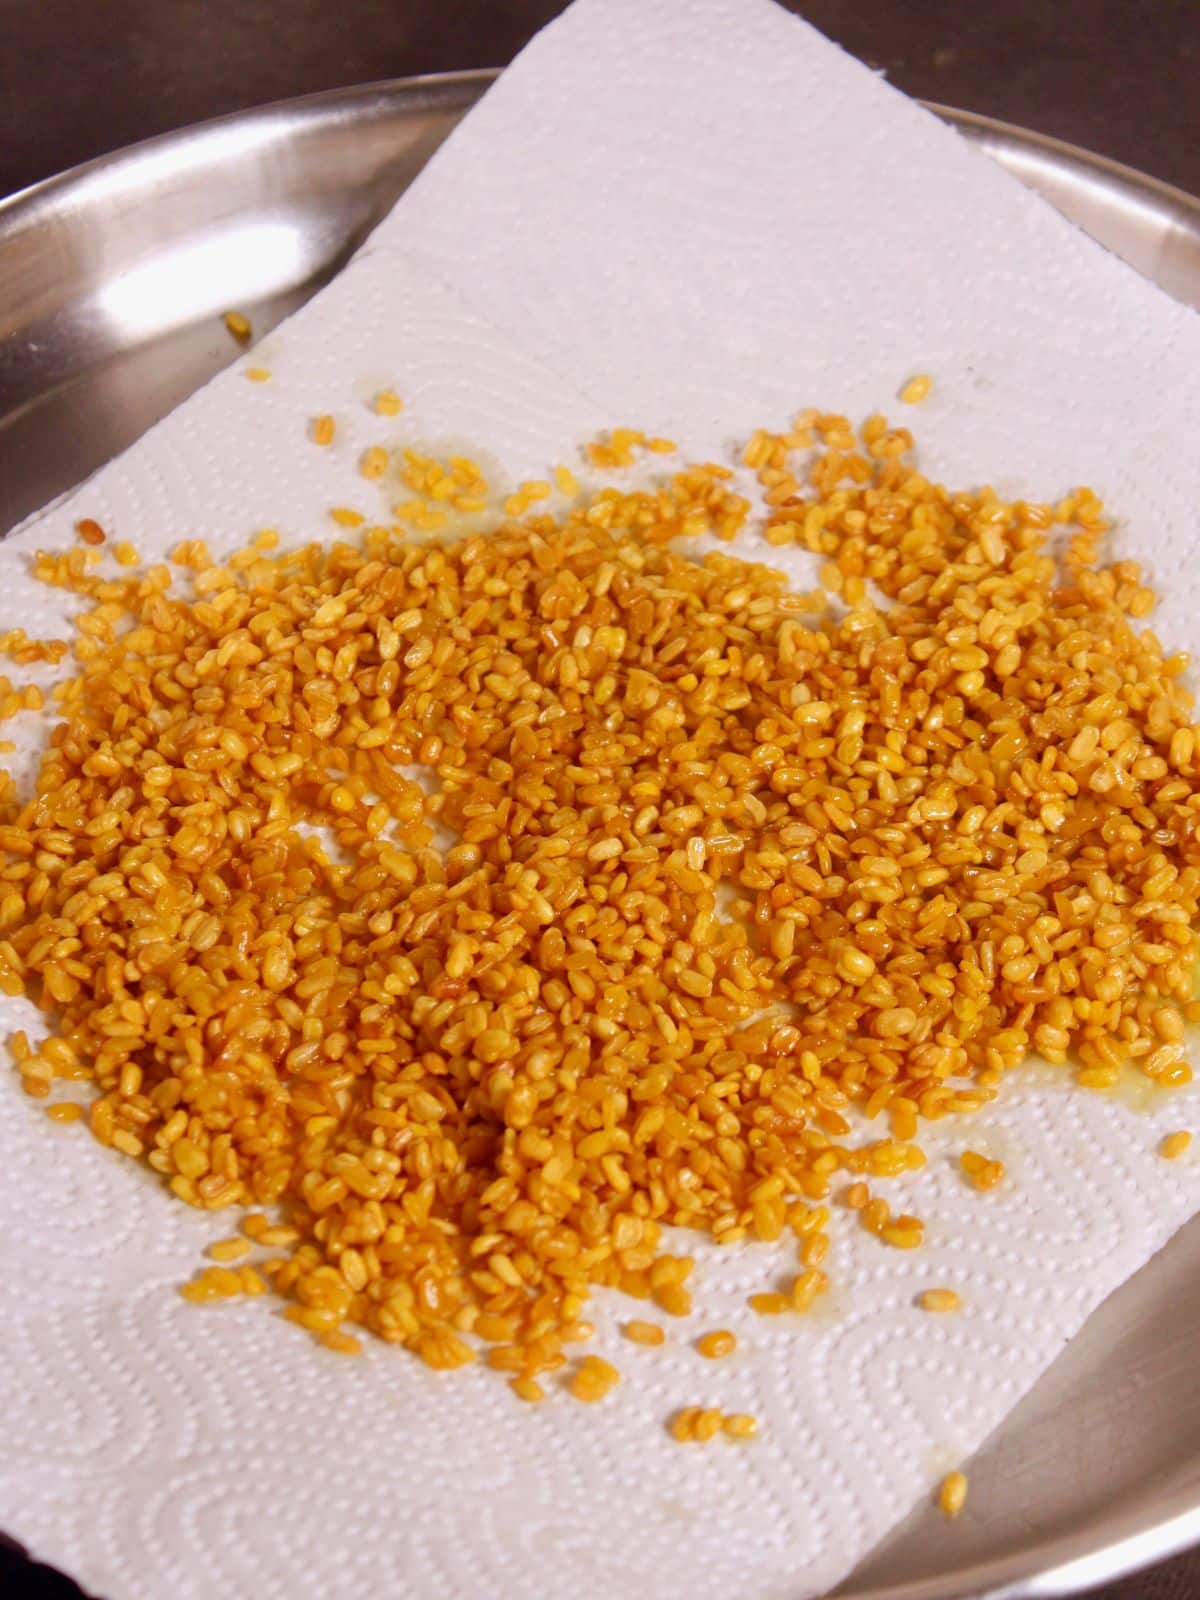 keep the fried moong dal into tissue paper to dry